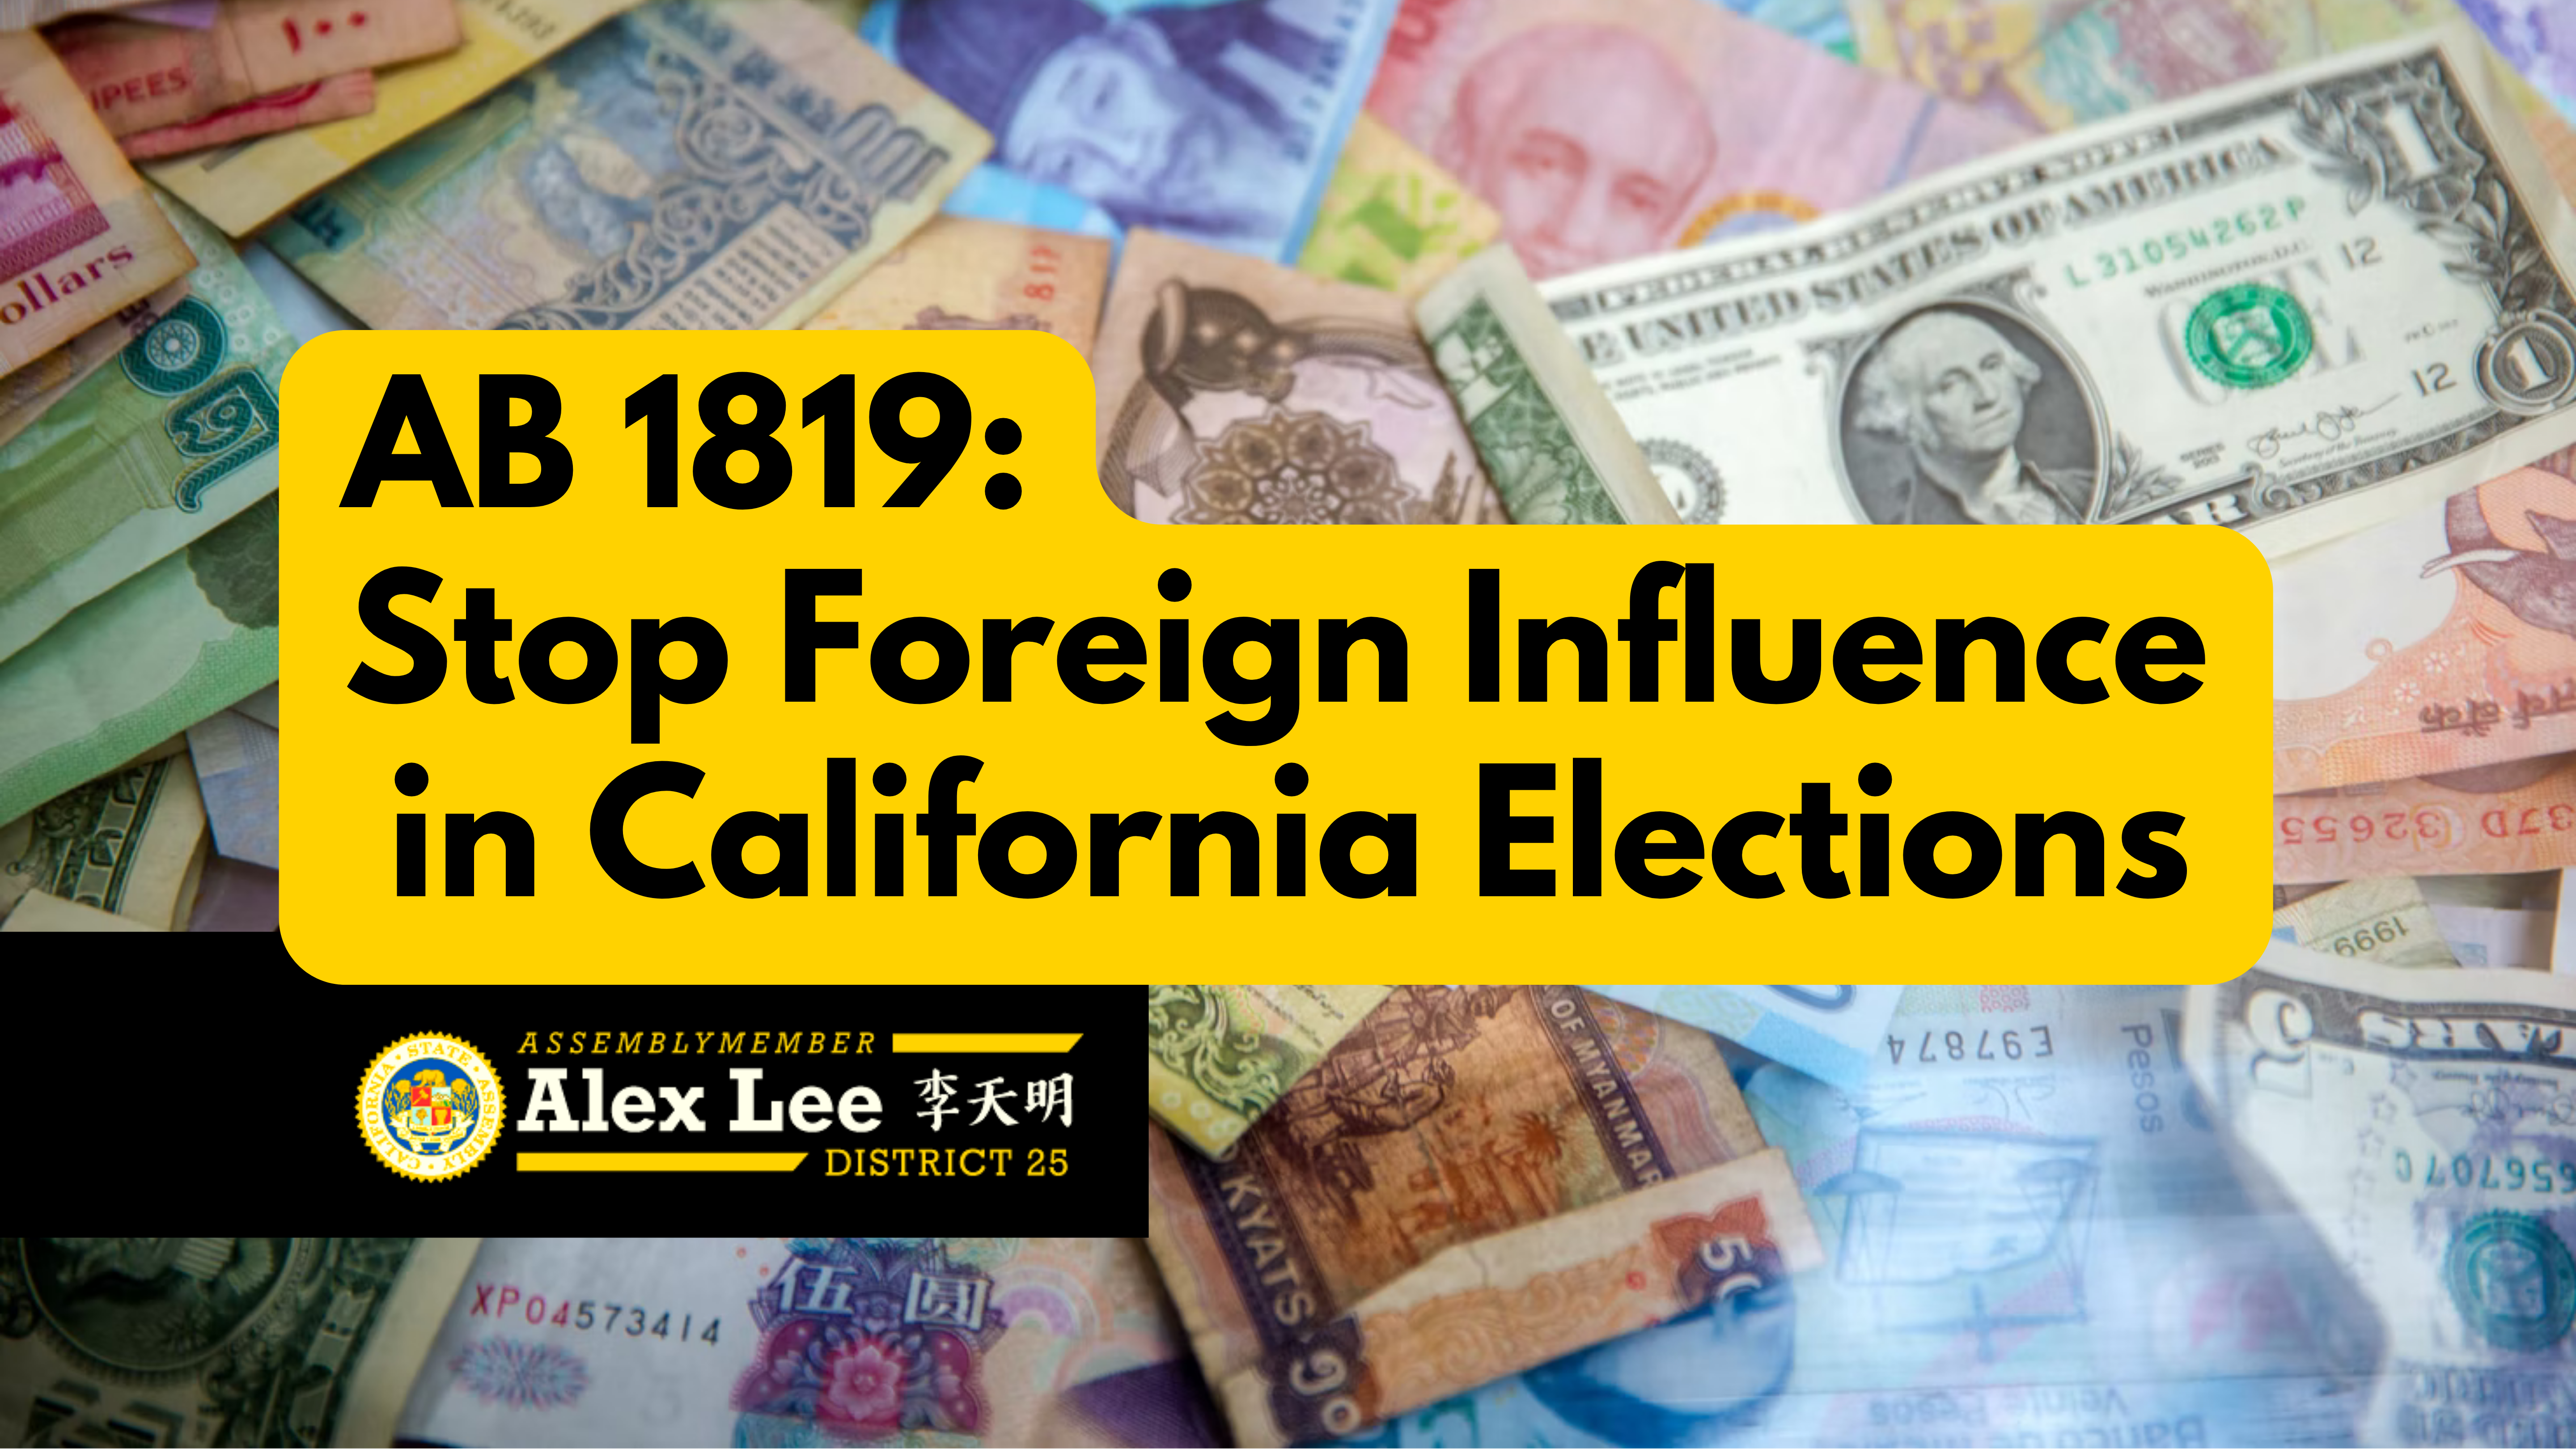 AB 1819 - Stop Foreign Influence in Elections with money in the background